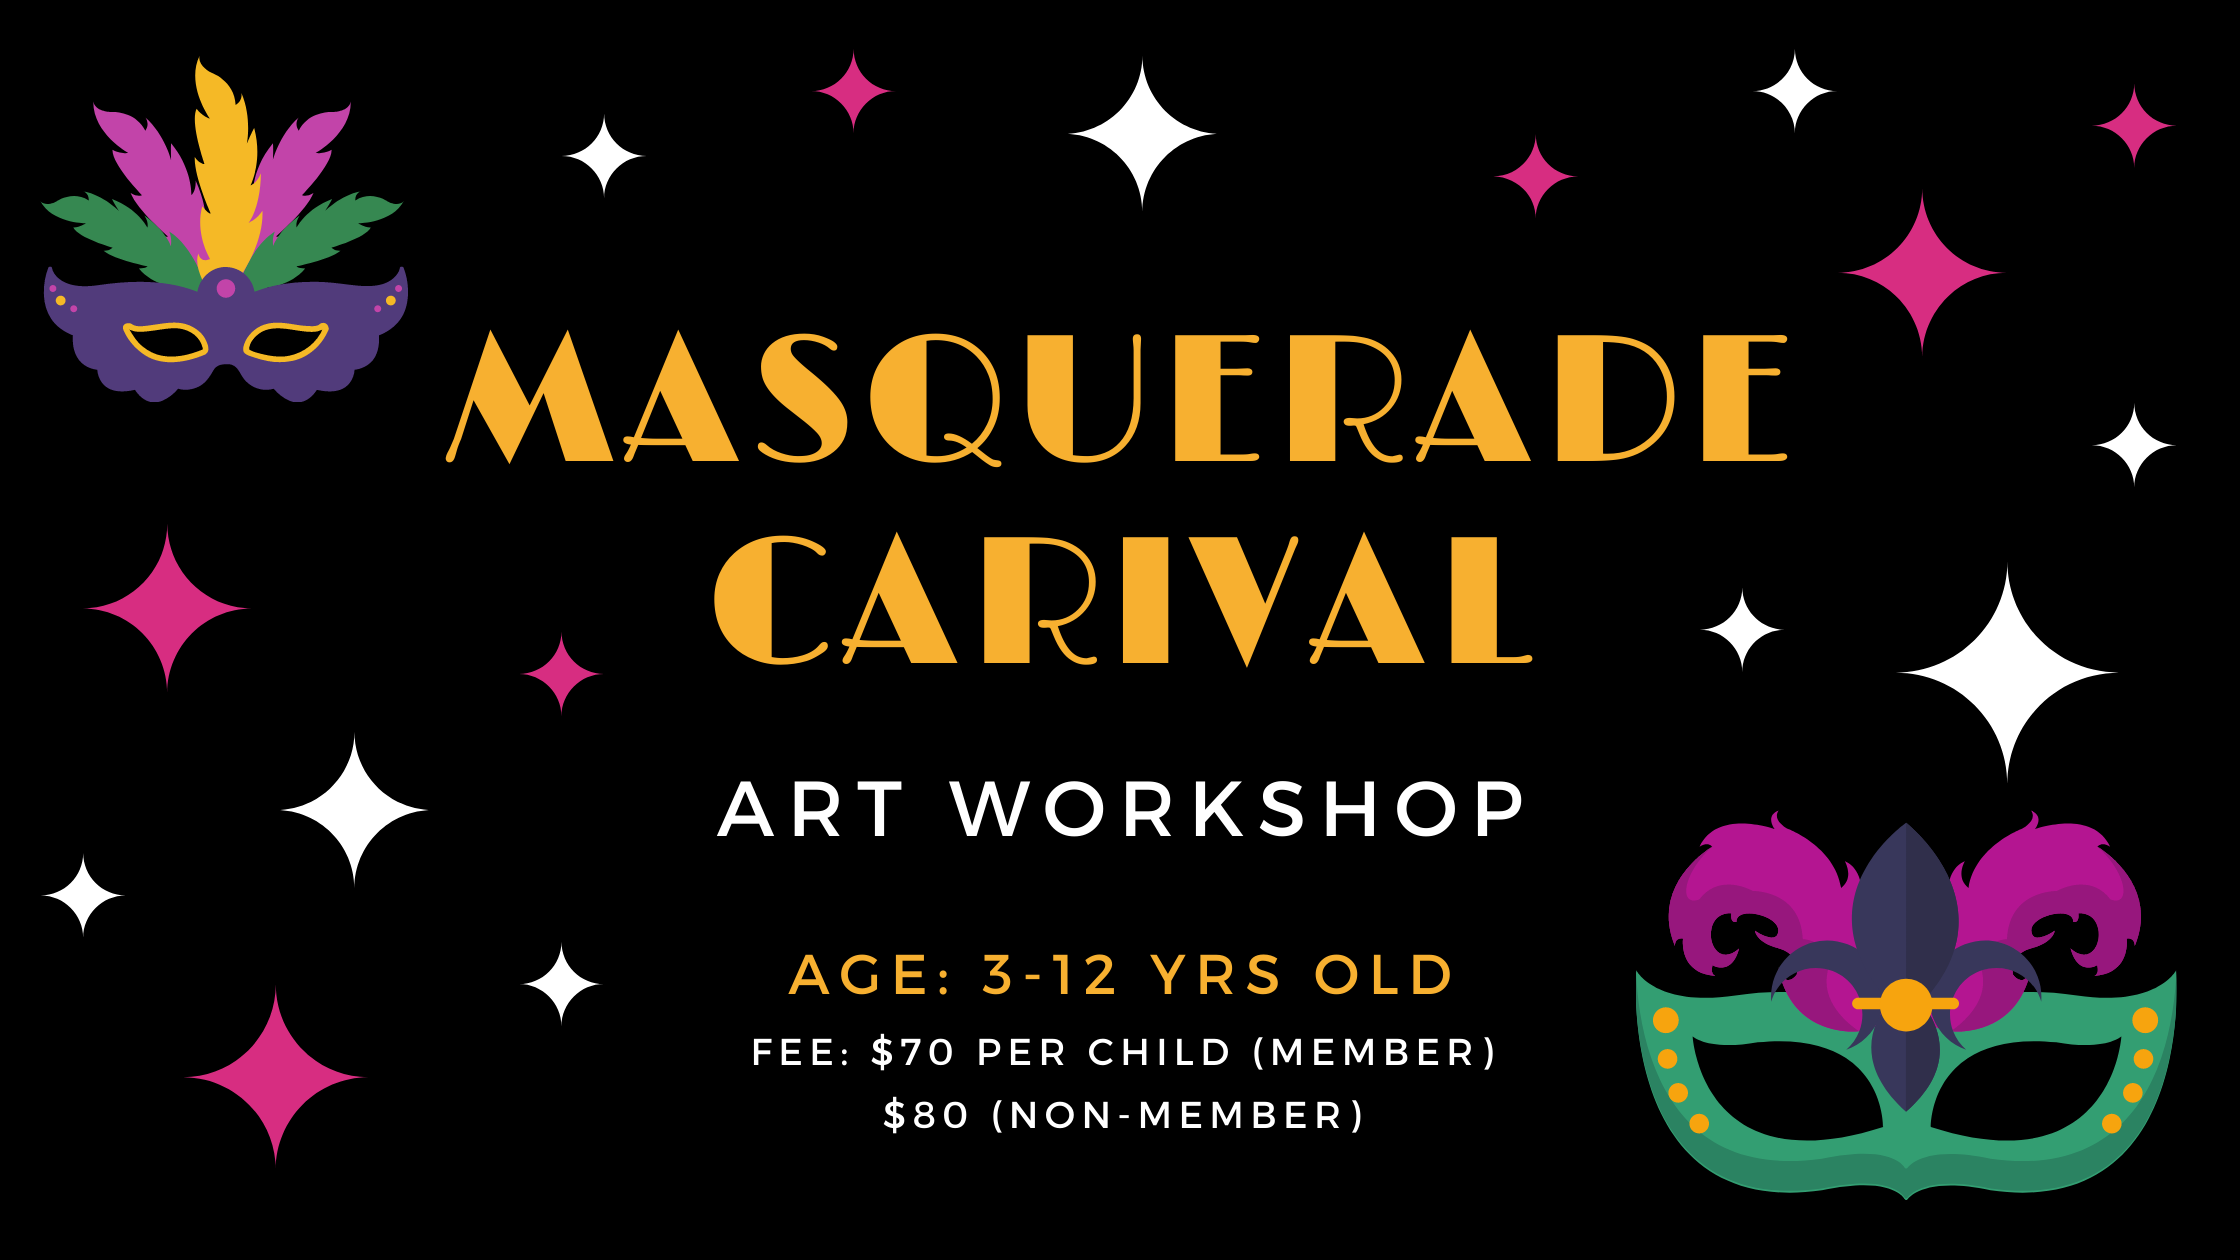 Masquerade carival art worshop for kids